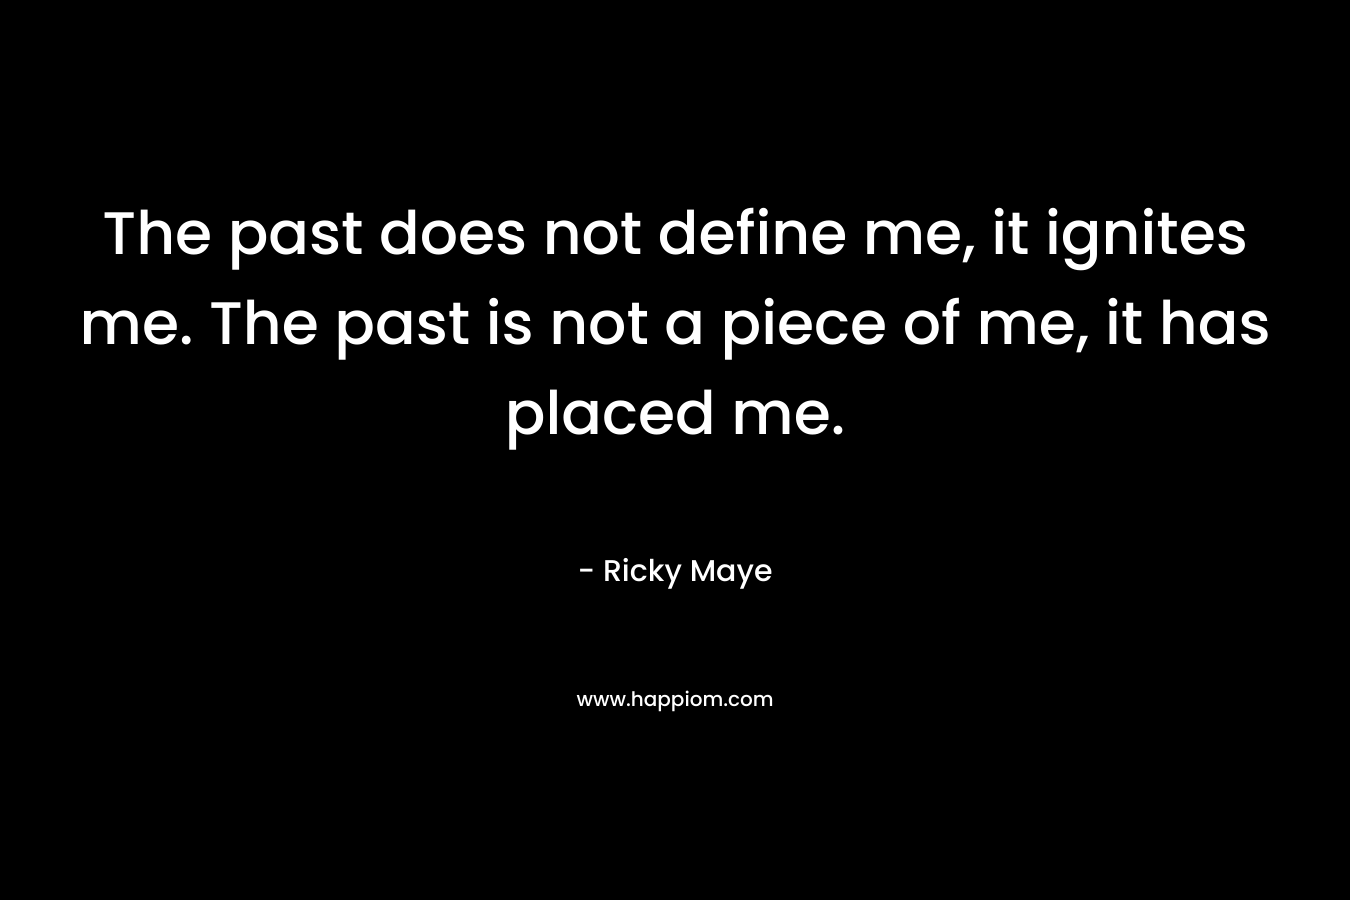 The past does not define me, it ignites me. The past is not a piece of me, it has placed me.